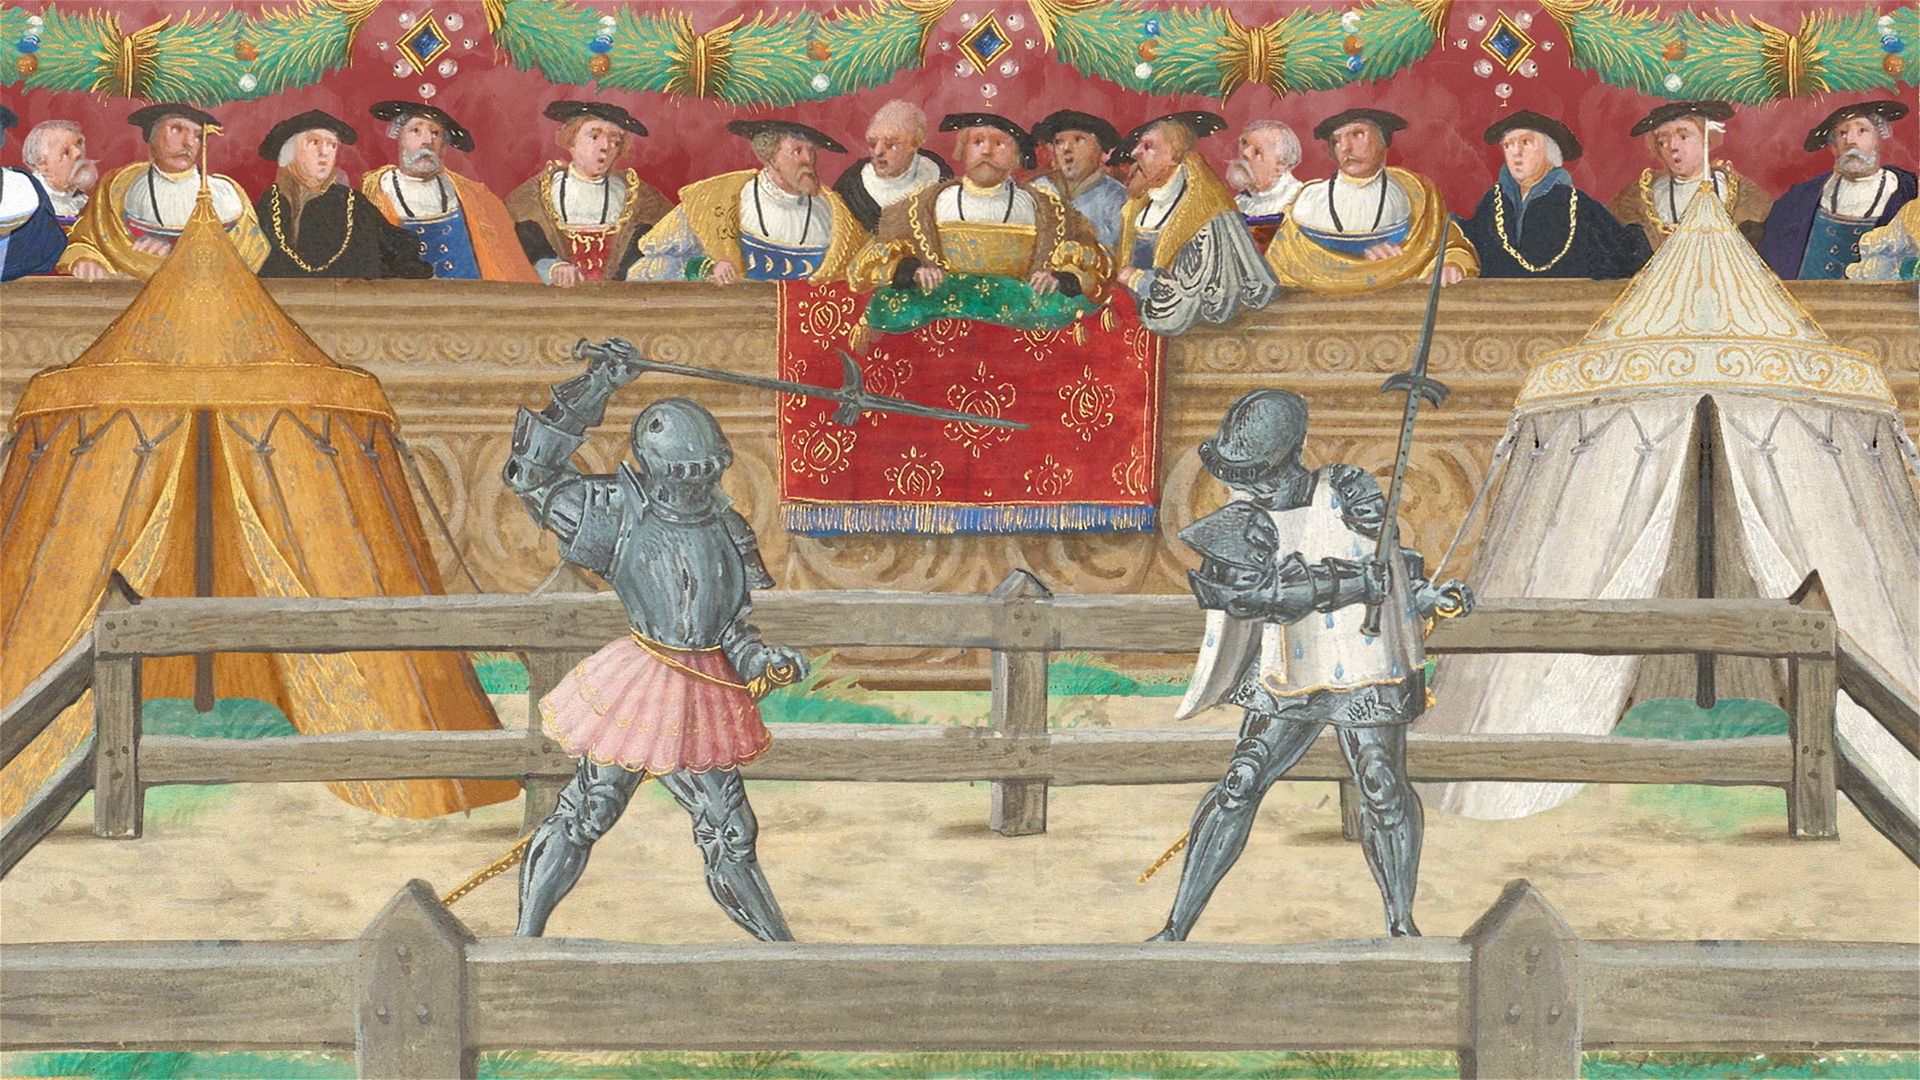 Two armored knights engaging in foot combat in an arena before a crowd of onlookers.